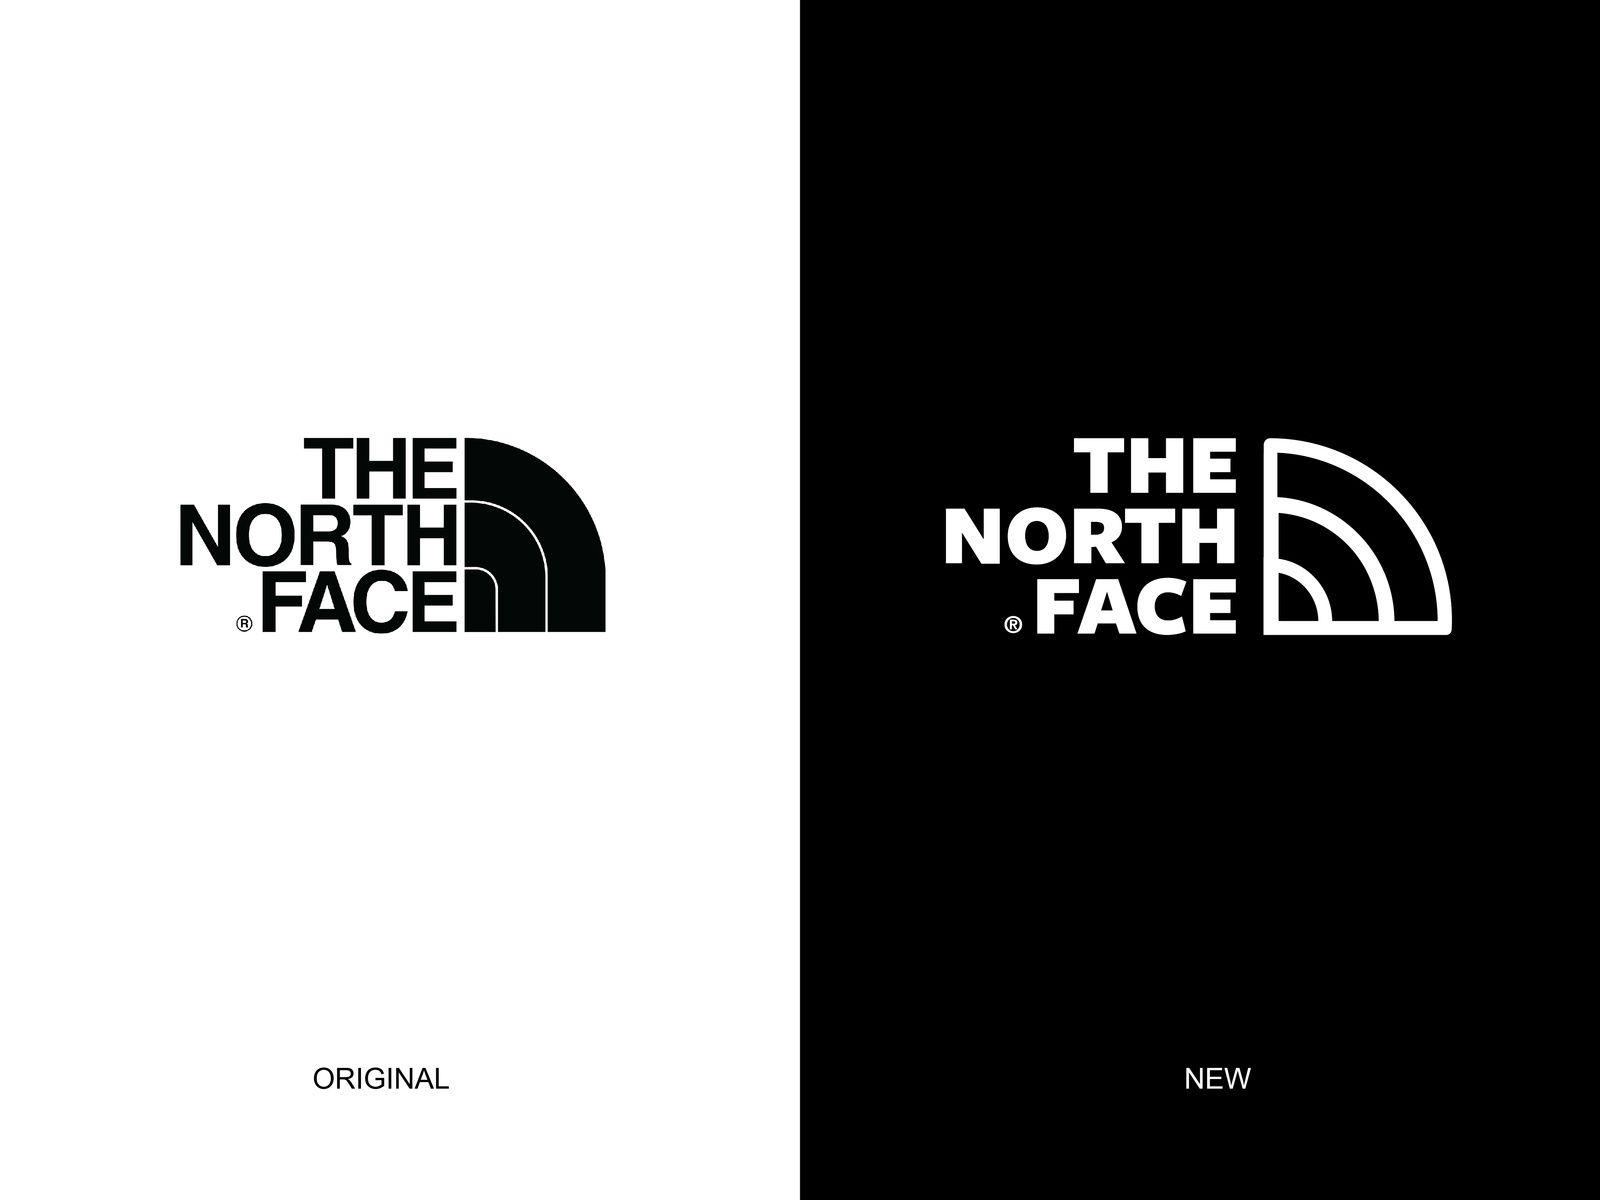 The North Face wallpaper by macjerk  Download on ZEDGE  e0f6